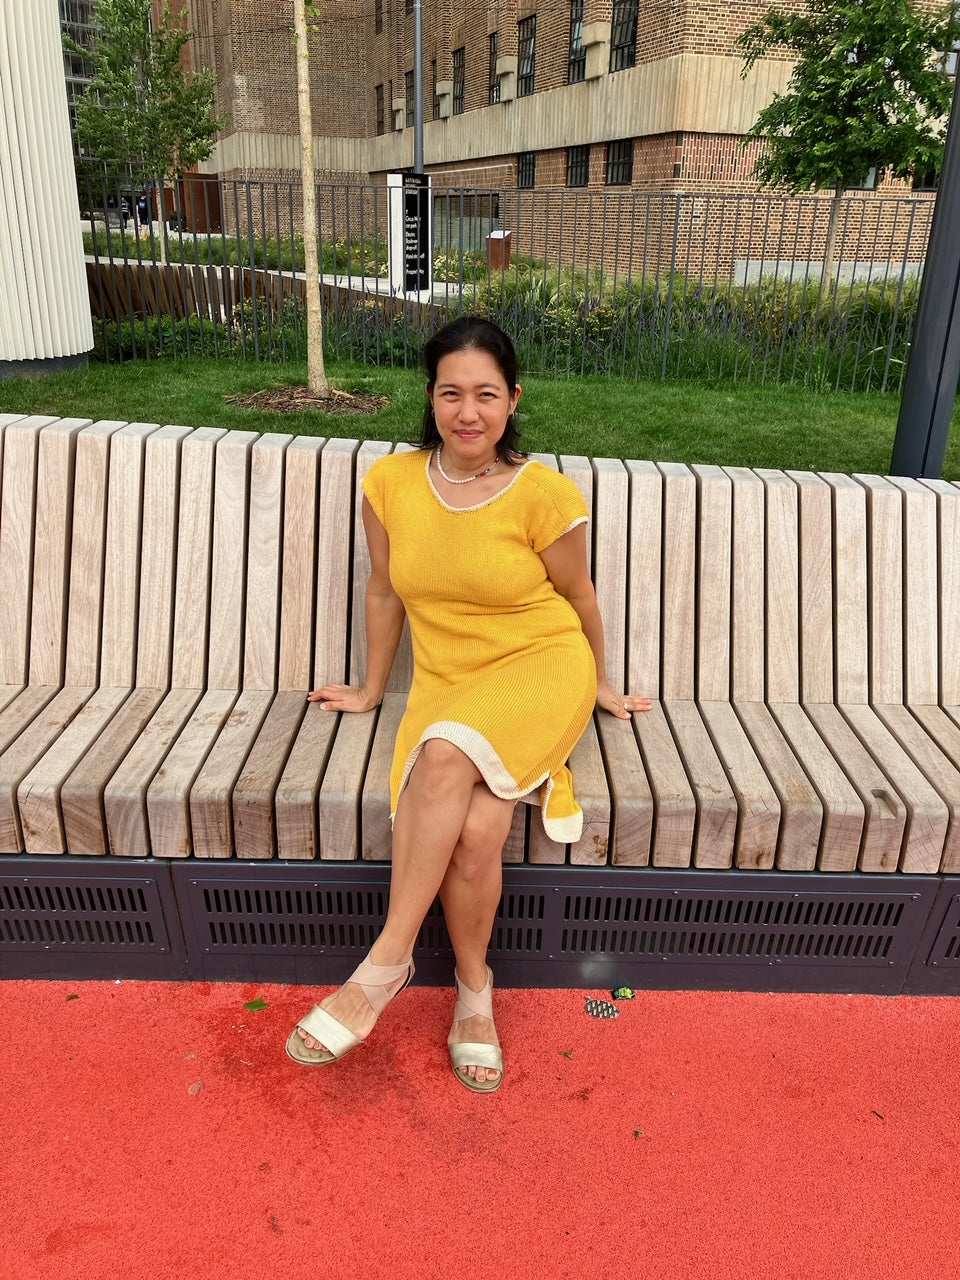 A person sits on a wooden bench, wearing a bright yellow and white hand knit dress with short sleeves.